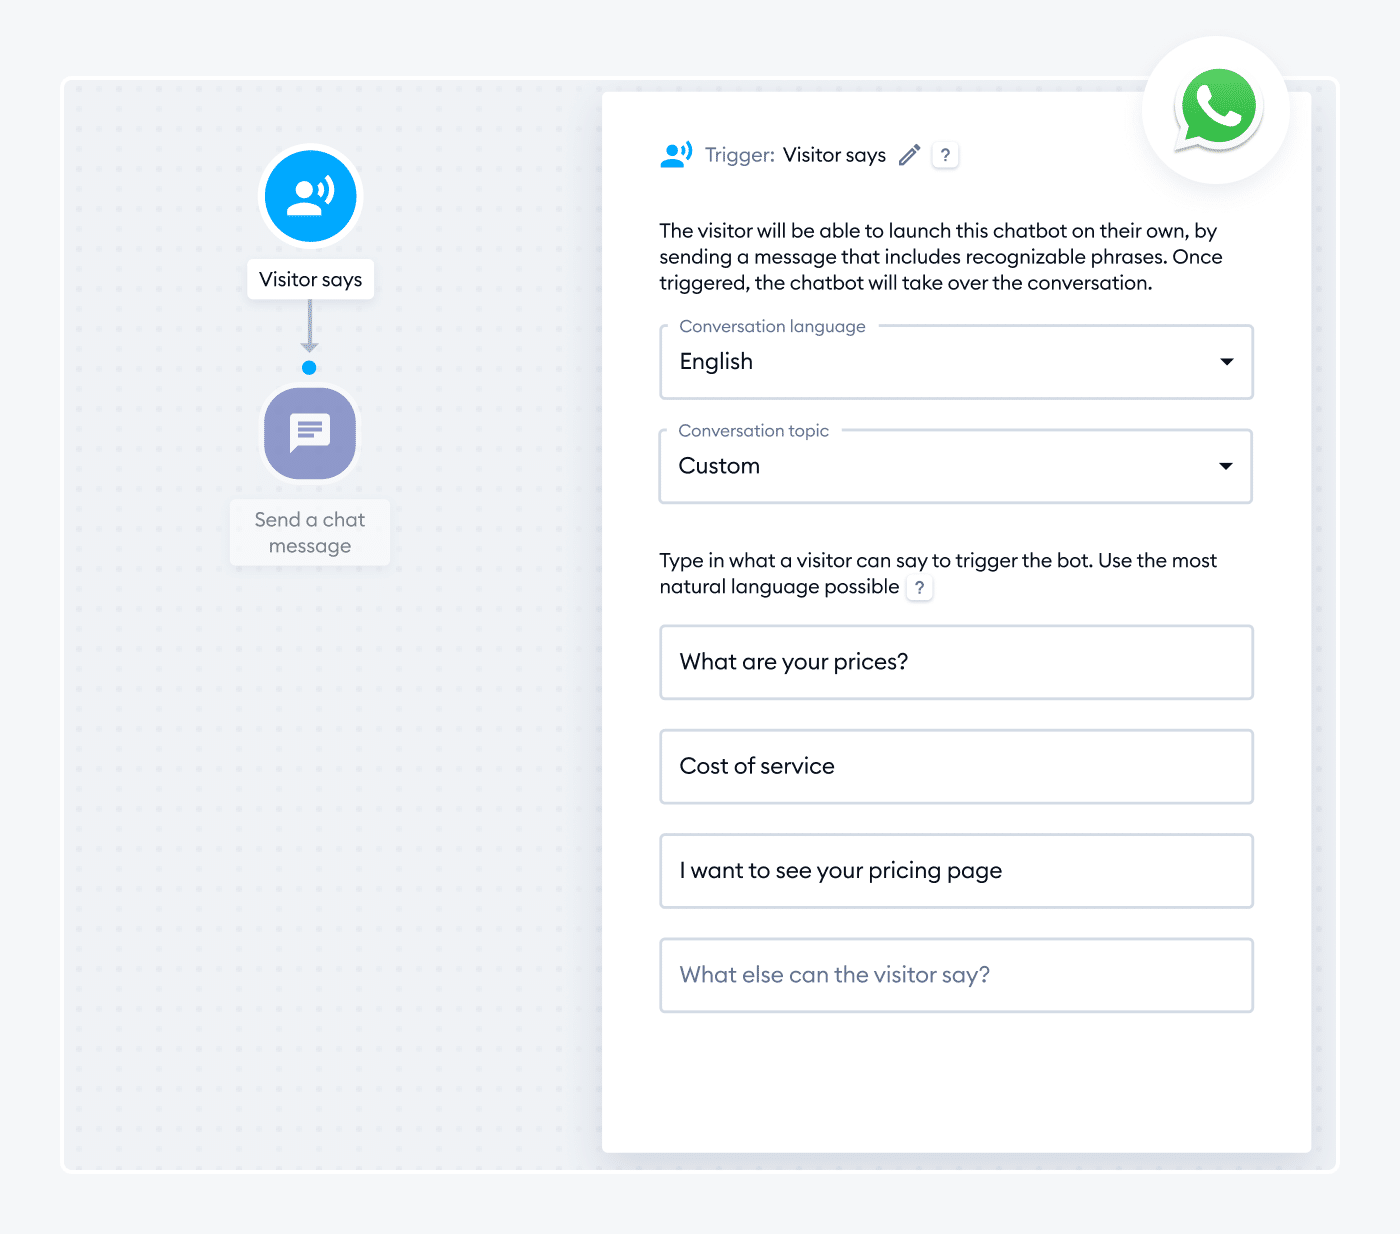 Designing the WhatsApp chatbot flow